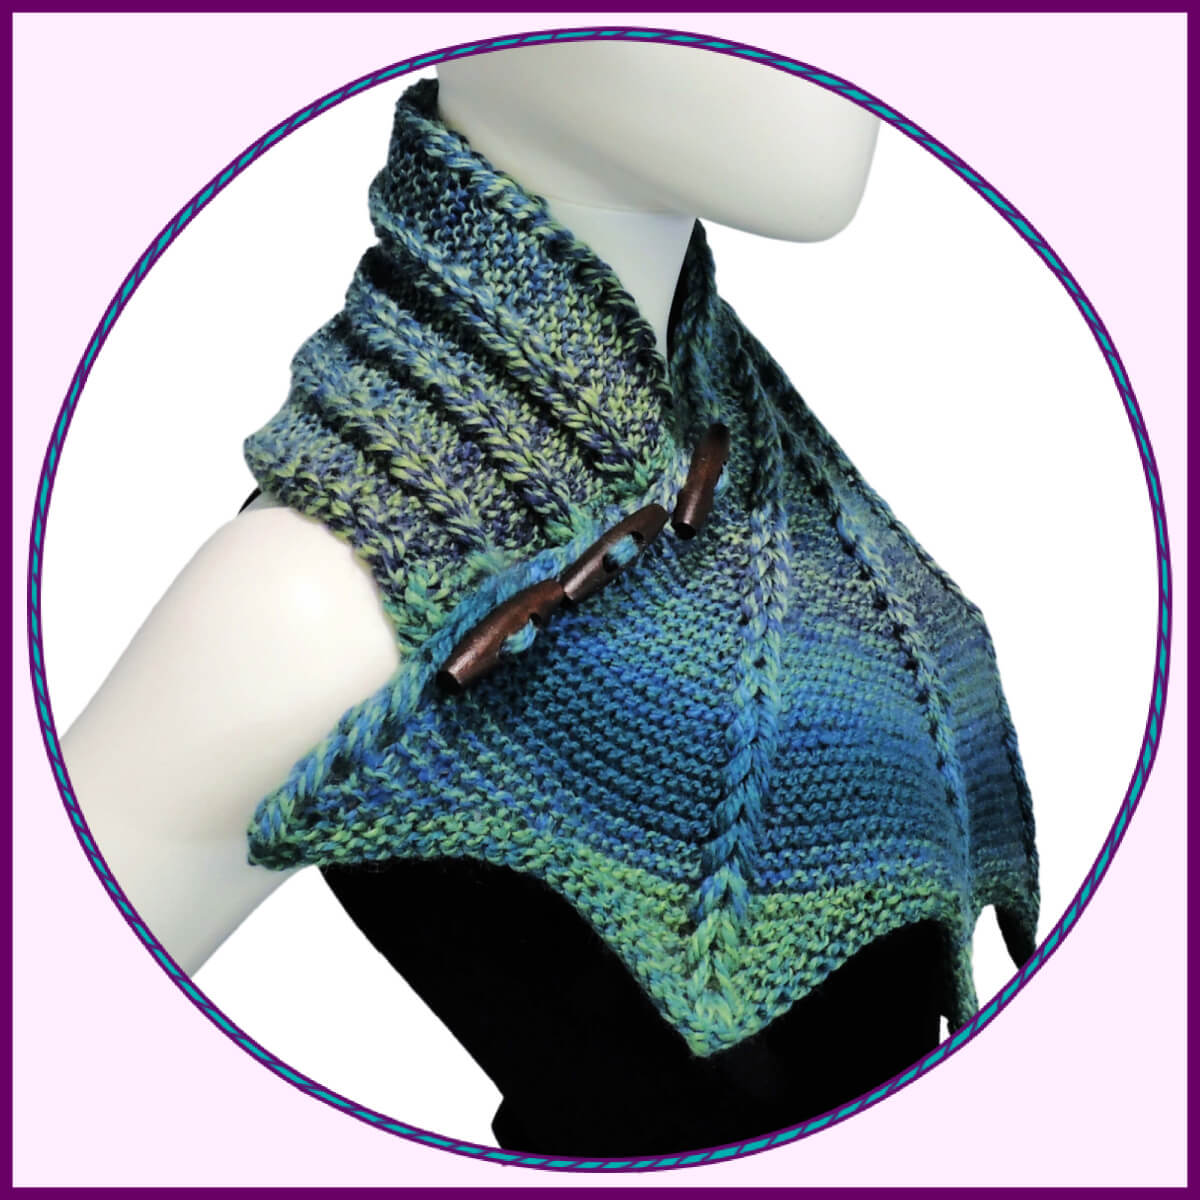 Round photo in pink square with purple border. Photo is side view of the top half of a white mannequin wearing a black tank top and a blue and green variegated knit buttoned cowl that is thin on one end then wraps around the neck and buttons to the other end which has flared out with 5 points. There are columns of raised large stitches from the short end to the tips. The cowl is buttoned on the side facing us.